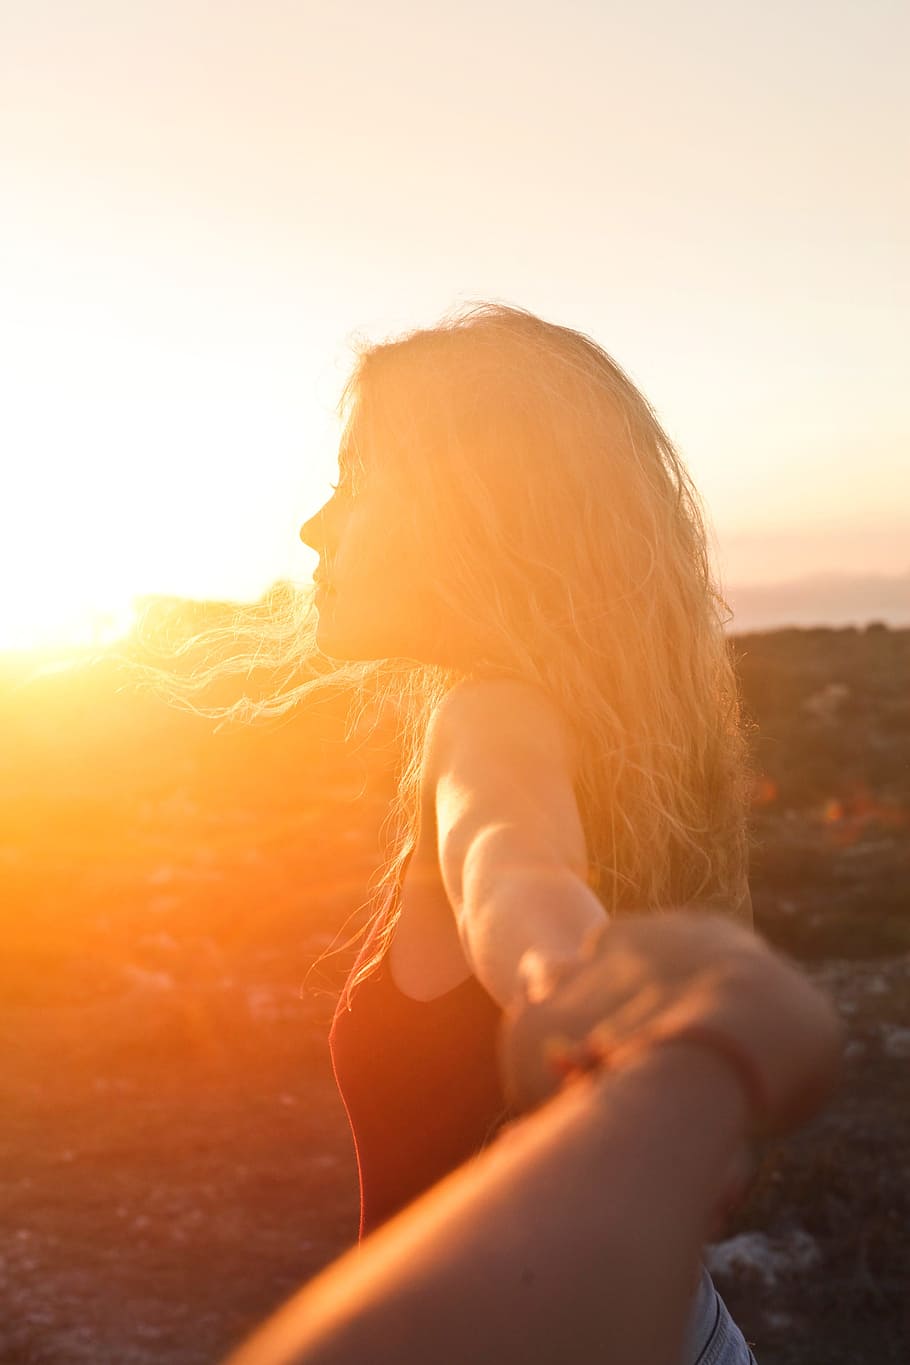 young, blonde, woman, looking, sunset, hand, held, another, 20-25 year old, horizon